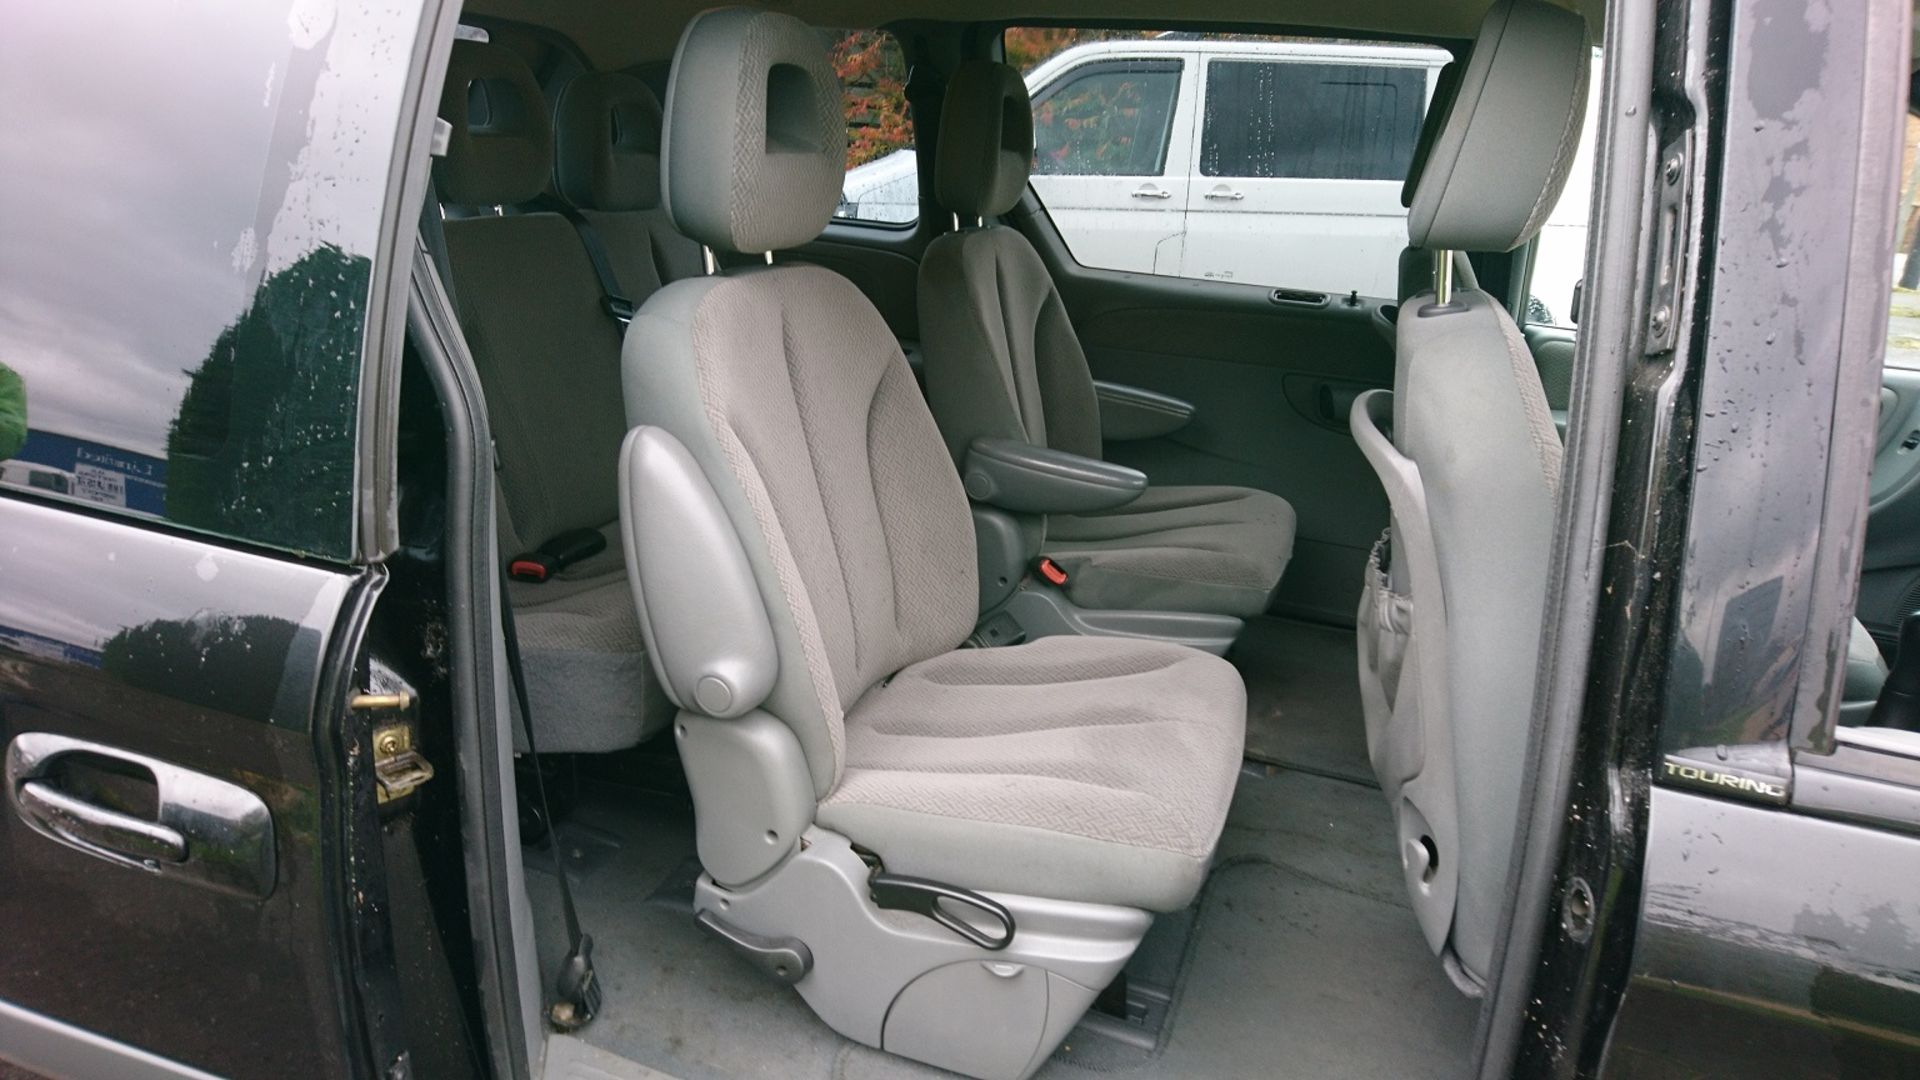 2007/07 REG CHRYSLER VOYAGER SE TOURING in GOOD STARTER AND DRIVER - 7 SEATS - Image 7 of 17